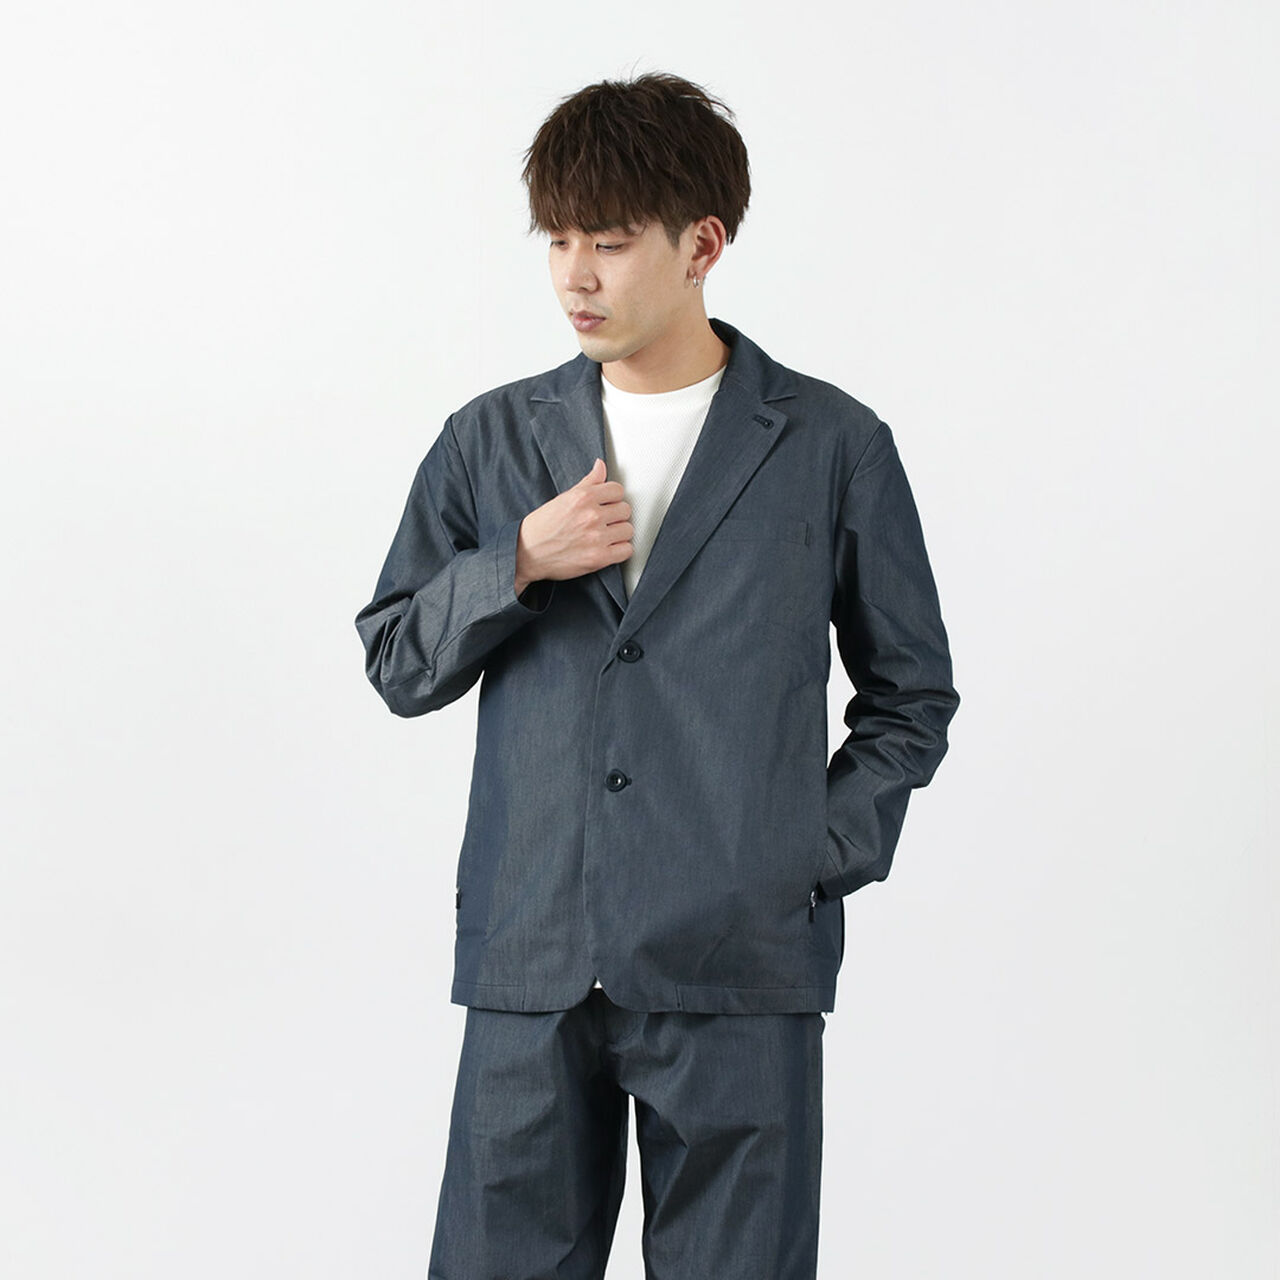 GO OUT Tailored Jacket,Navy, large image number 0